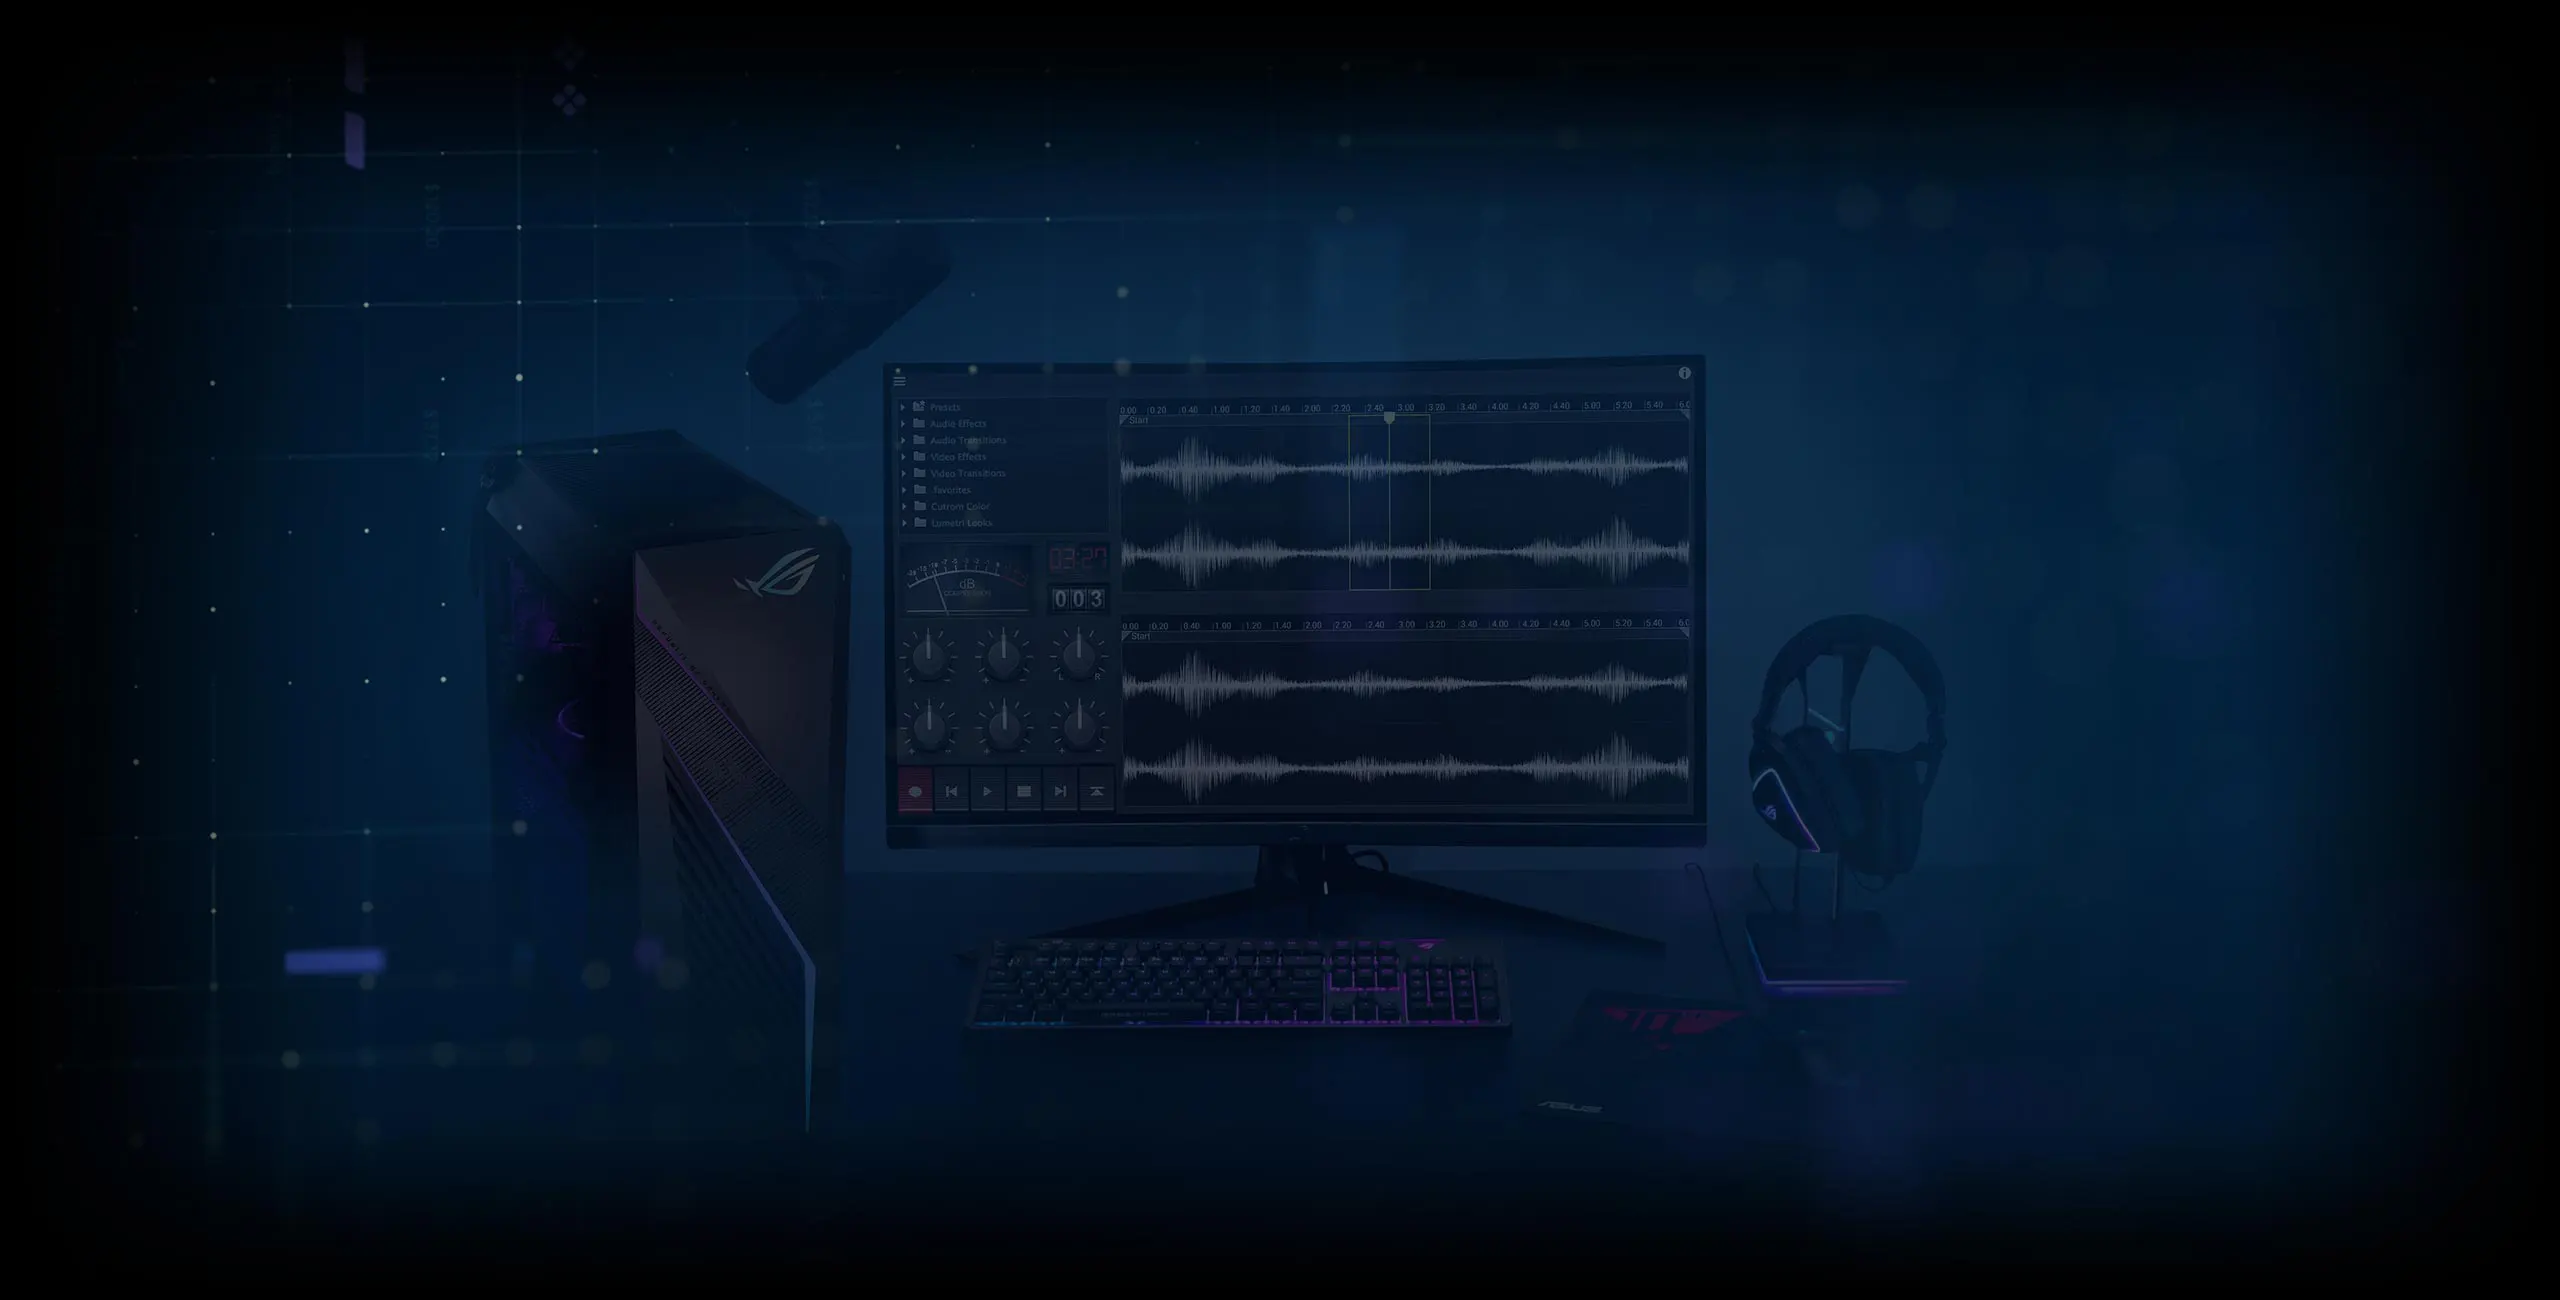 The ROG G16 next to a monitor with sound recording software showing on screen and sound waves coming in from all angles.